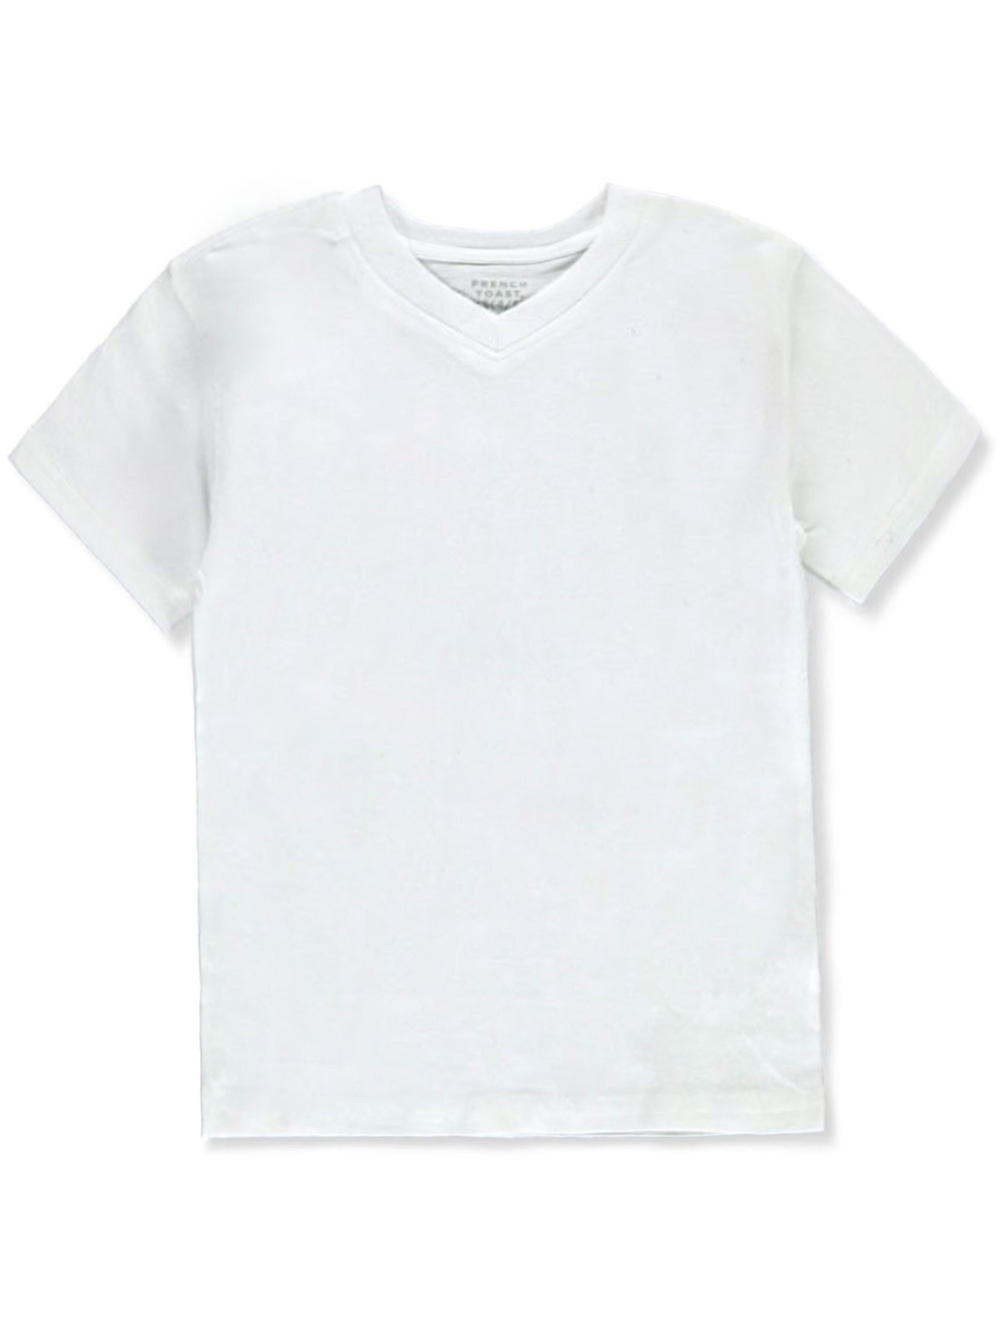 Size 4-5 T-Shirts for Boys